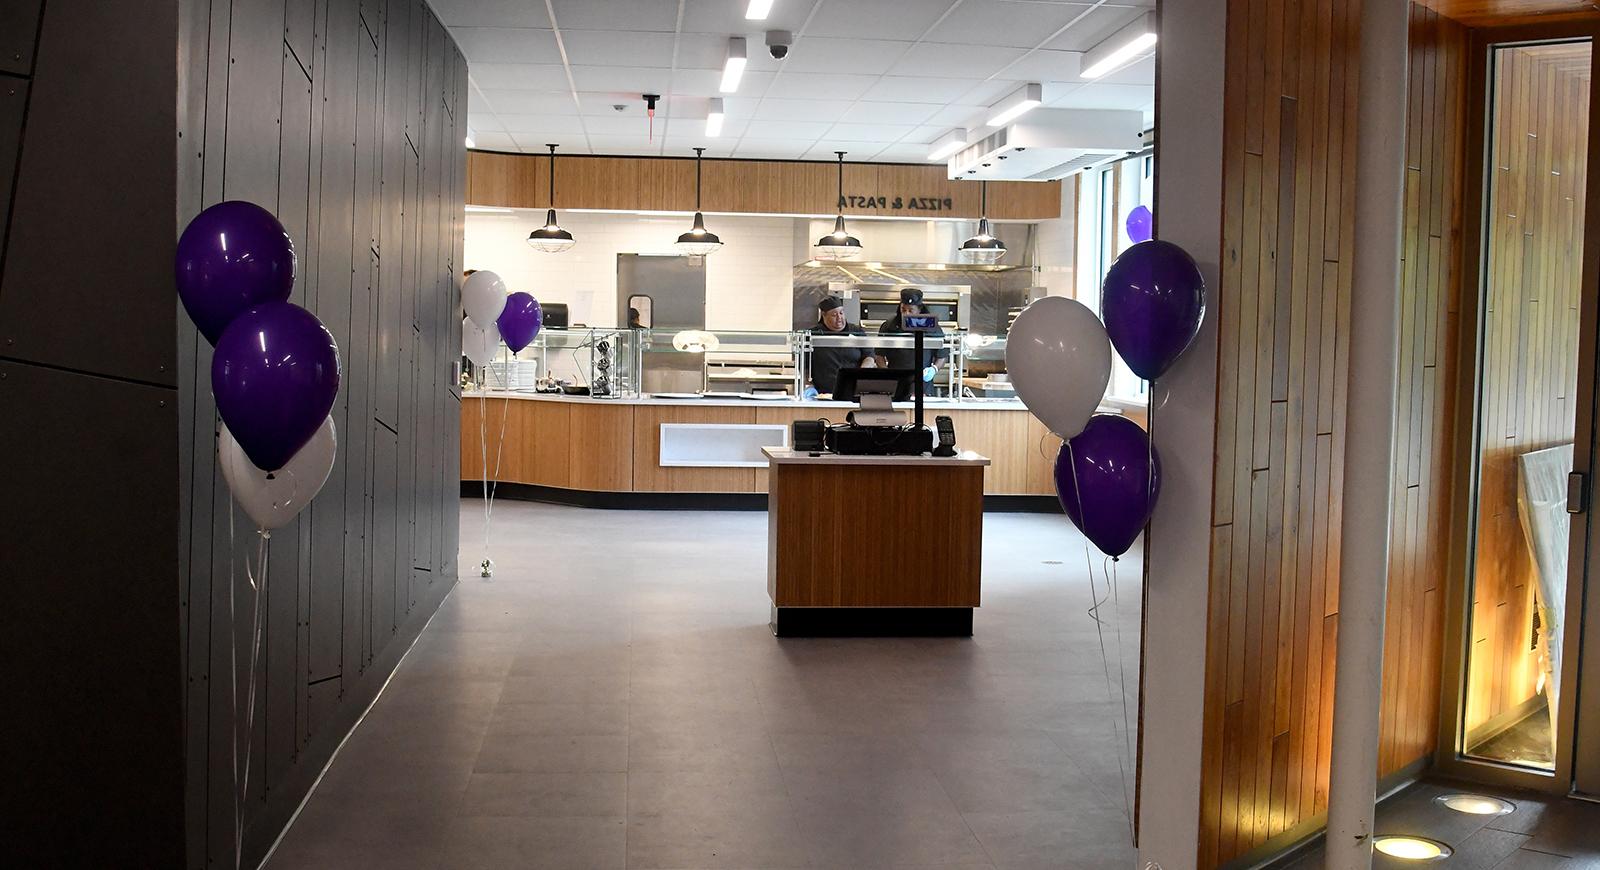 Photo of the entryway to the newly remodeled Anderson Dining Hall, with purple balloons